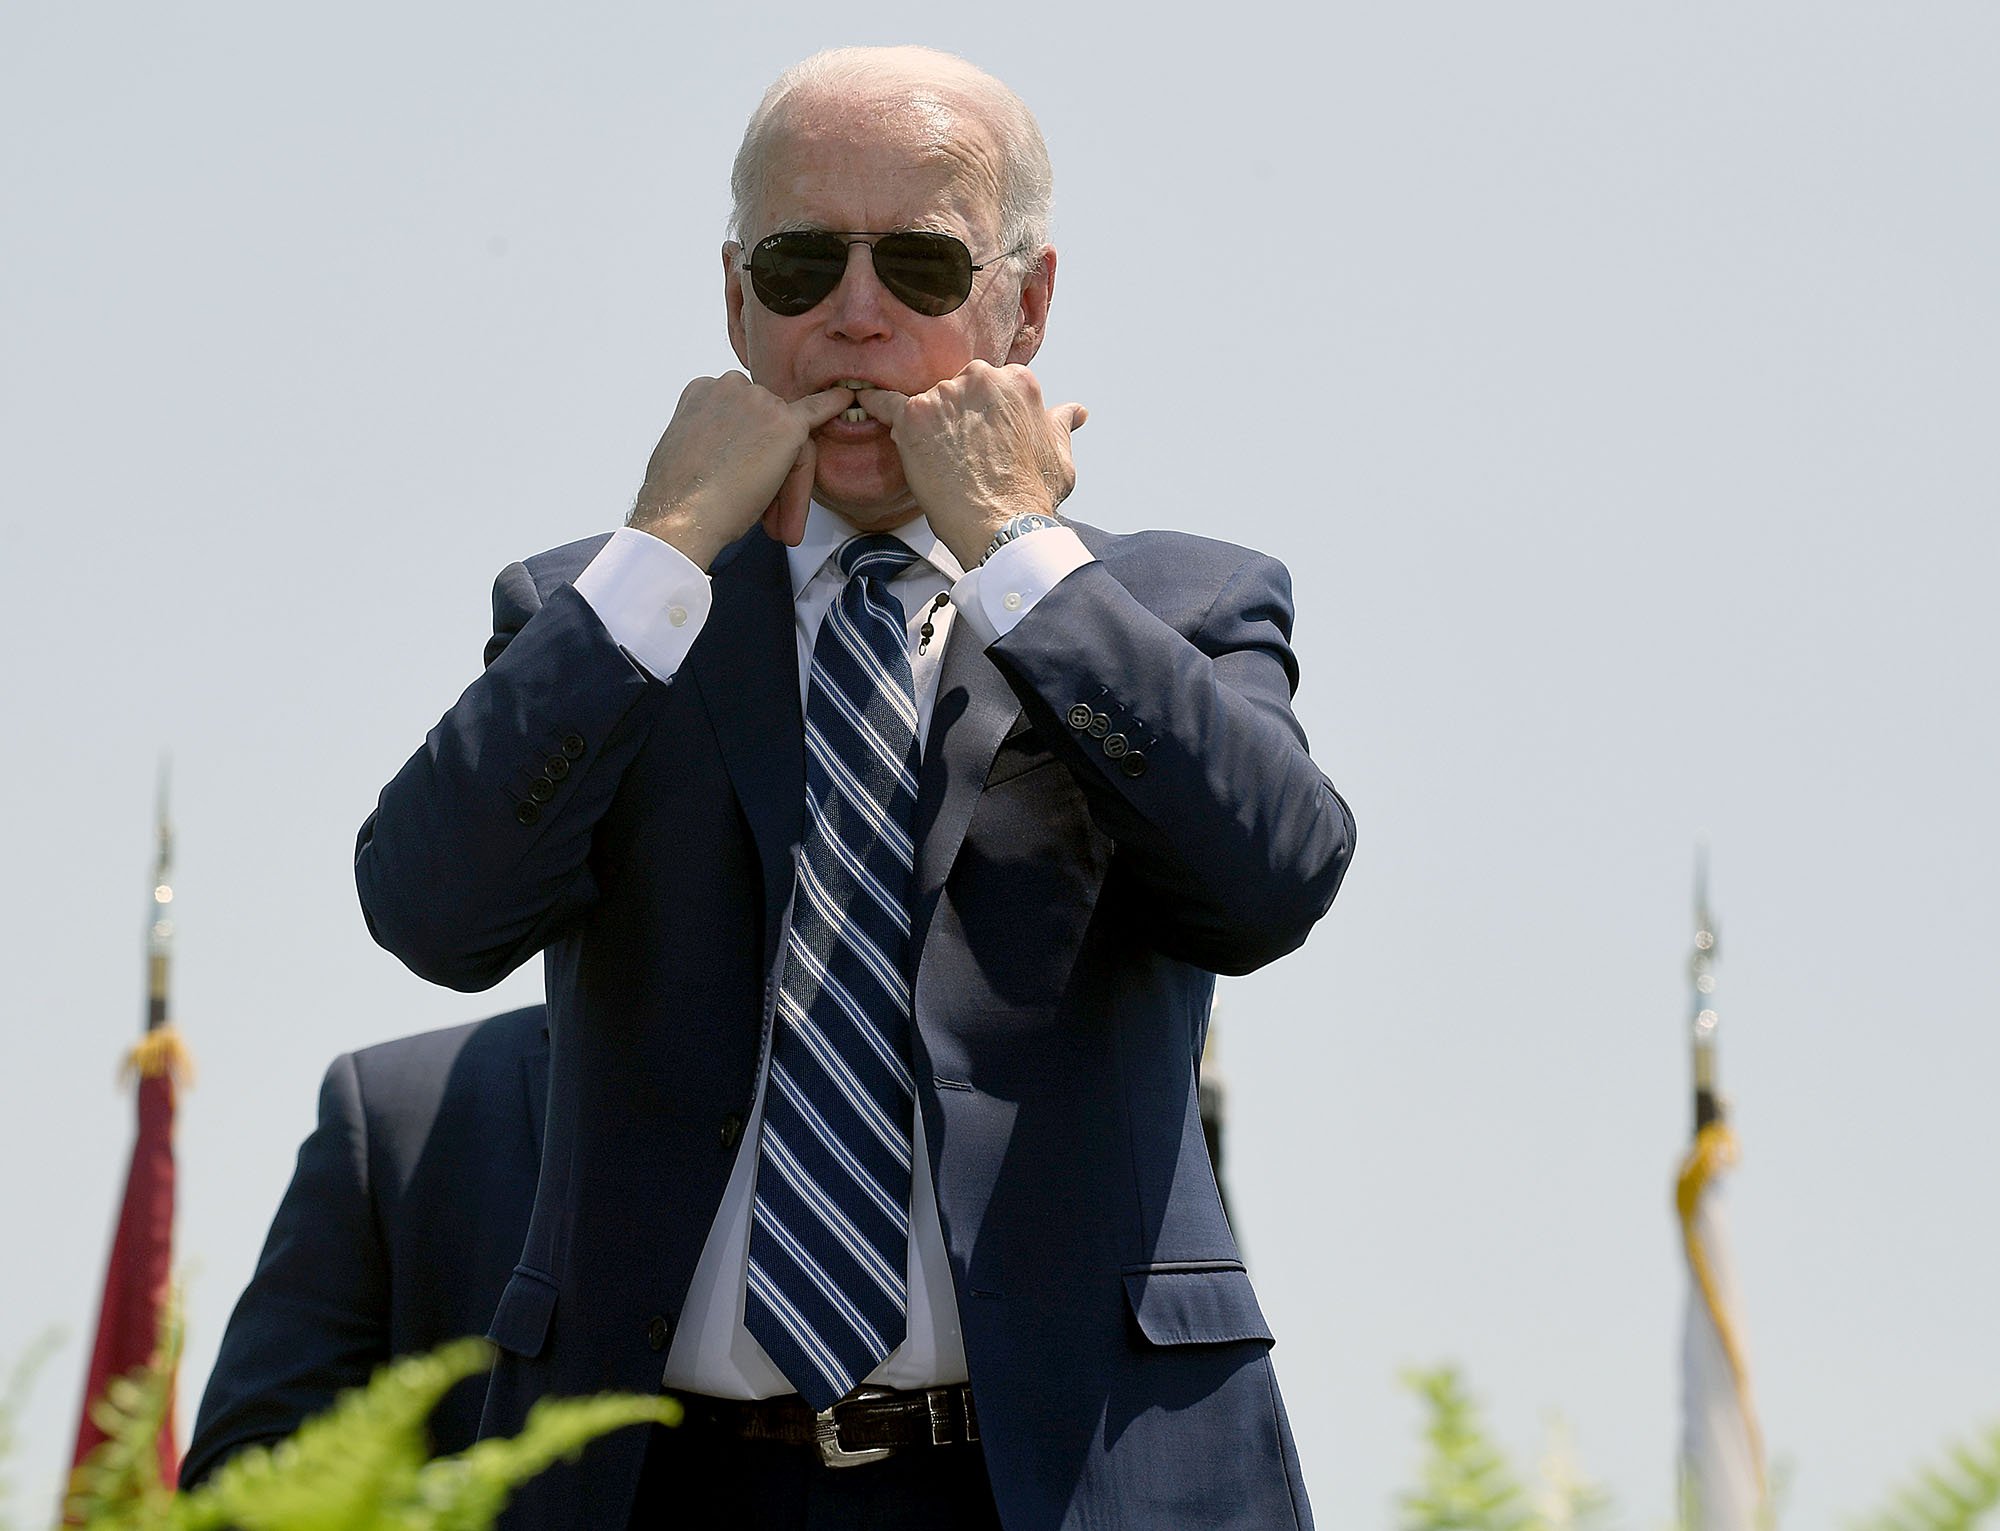  U.S. President Joe Biden puts his fingers in his mouth to whistle during the United States Coast Guard Academy 2021 Commencement Ceremonies at the school New London on Wednesday, May 19, 2021. (Sarah Gordon/The Day)  